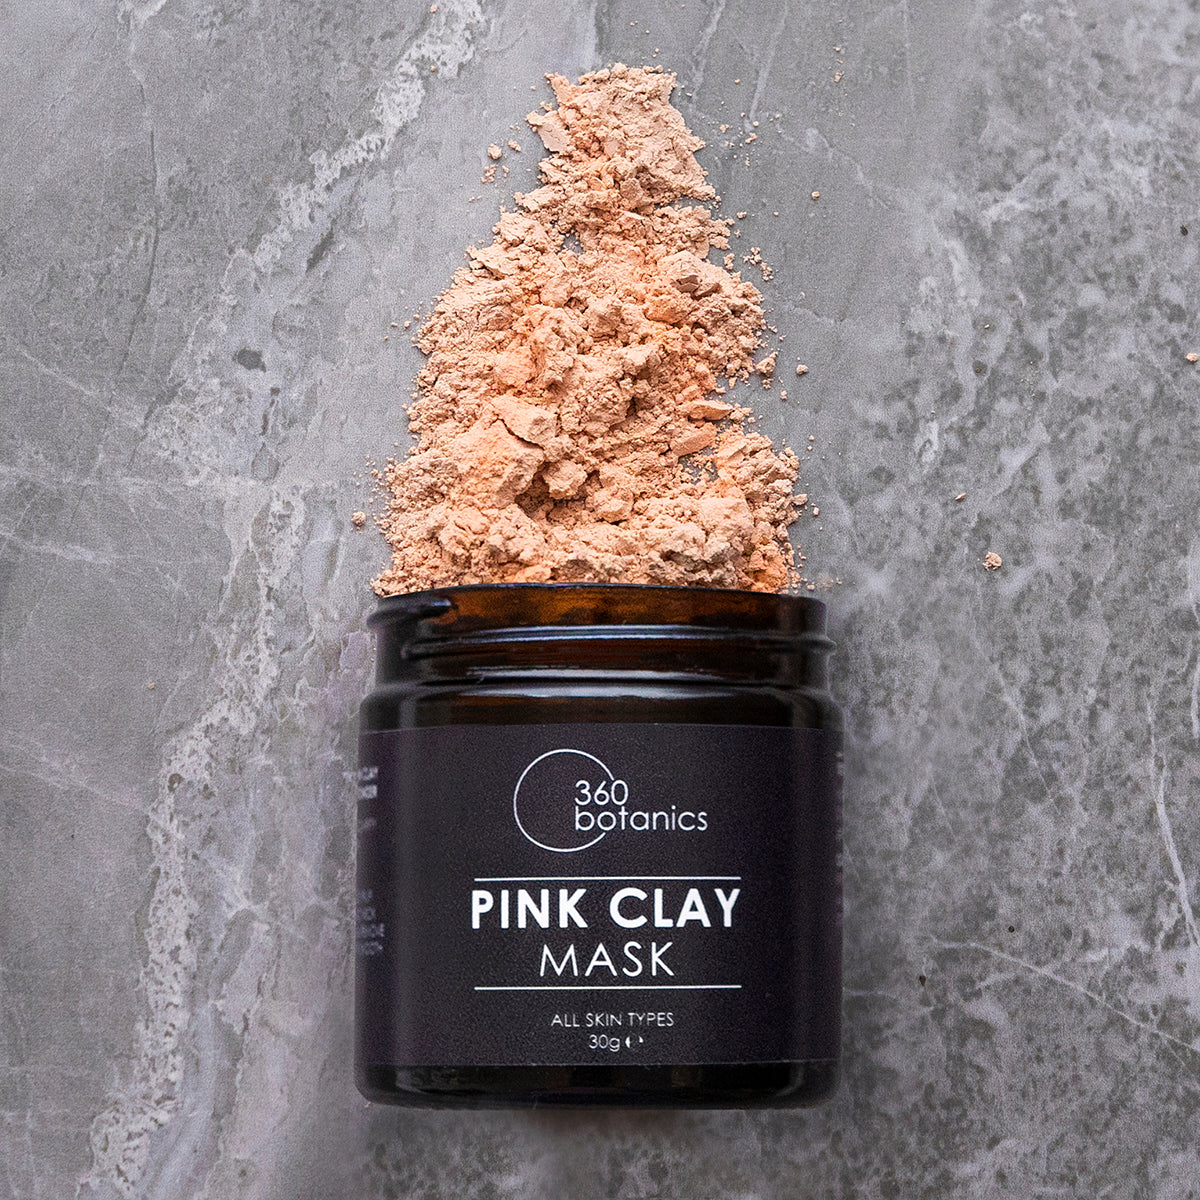  pink clay jar photographed on grey marble